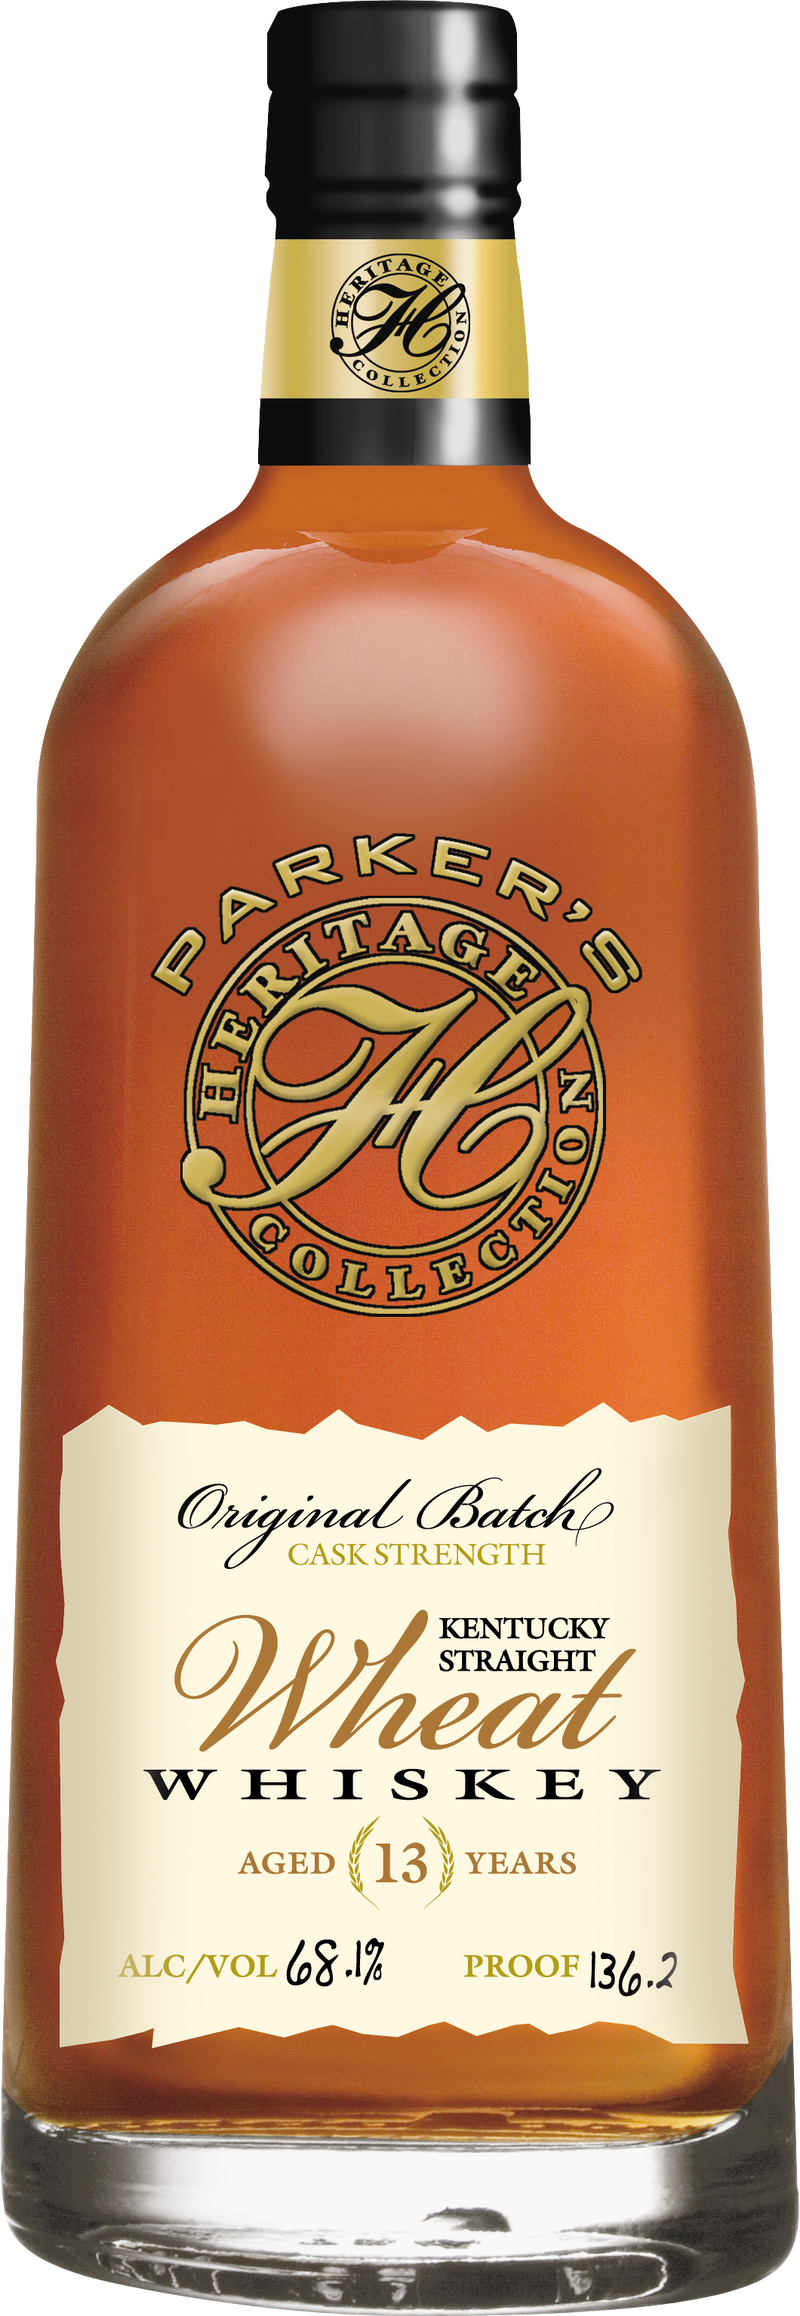 Parkers Heritage 13 Year Old Wheat Whiskey 750mL